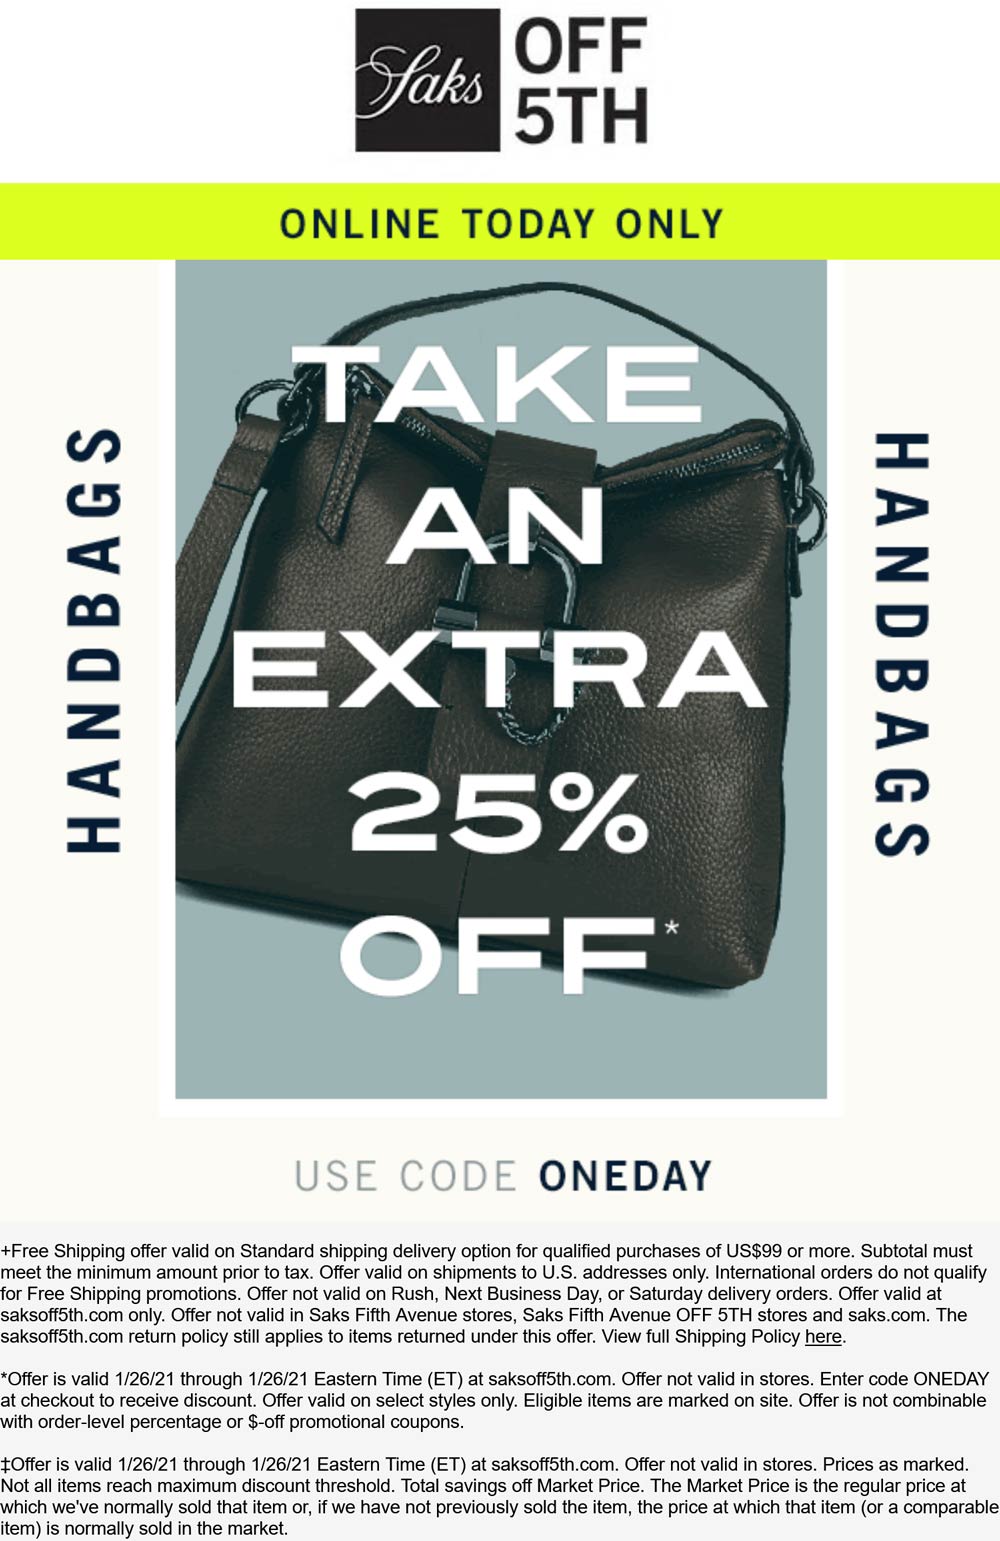 OFF 5TH stores Coupon  Extra 25% off online today at Saks OFF 5TH via promo code ONEDAY #off5th 